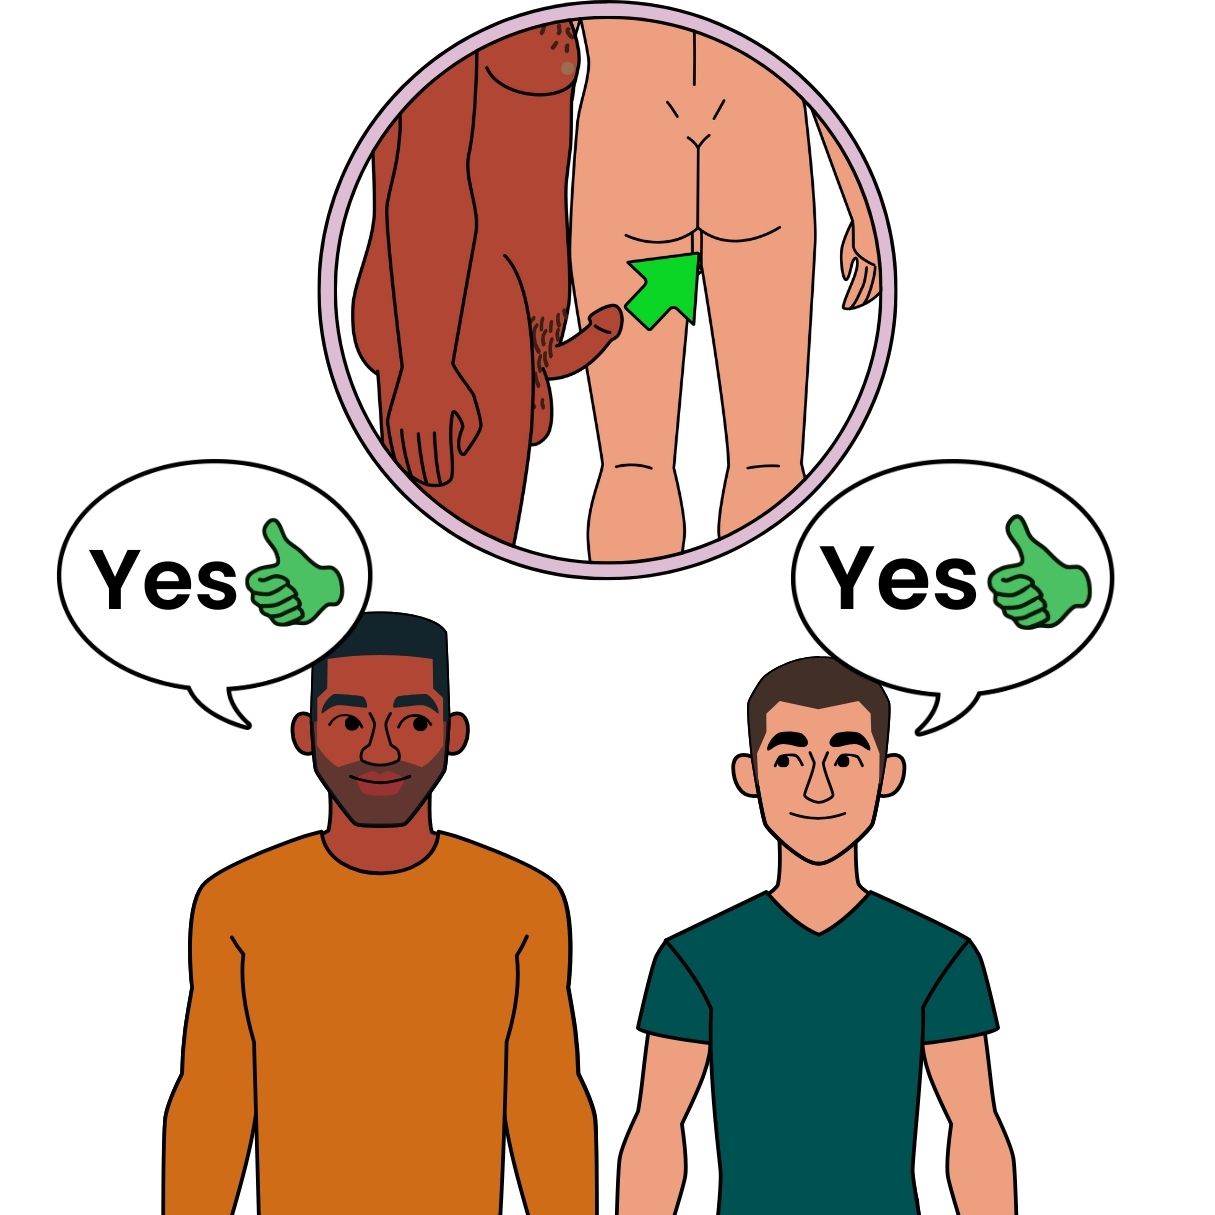 image of an arrow pointing from an erect penis to a person's bottom.